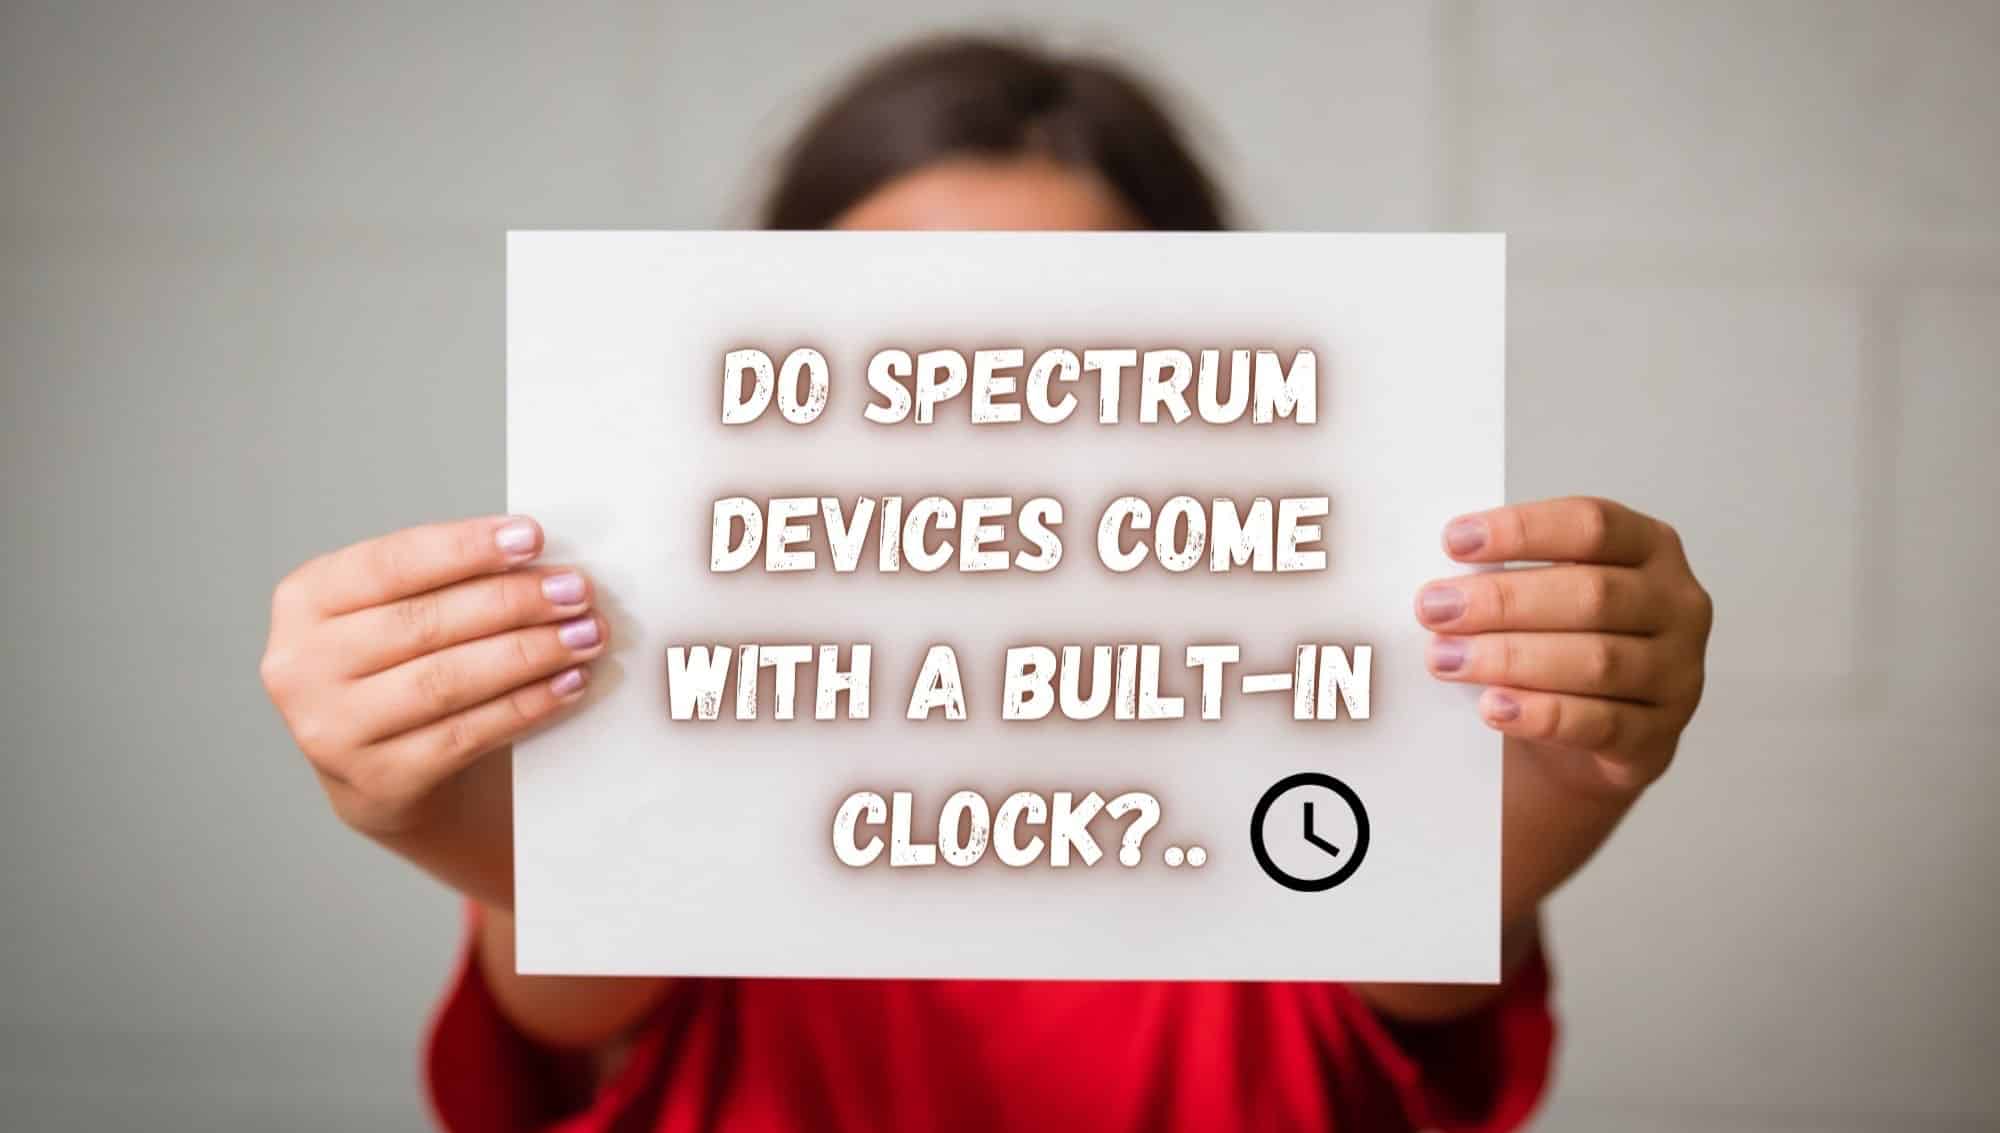 Spectrum Cable Box No Clock Do Spectrum Devices Come With a Built-in Clock